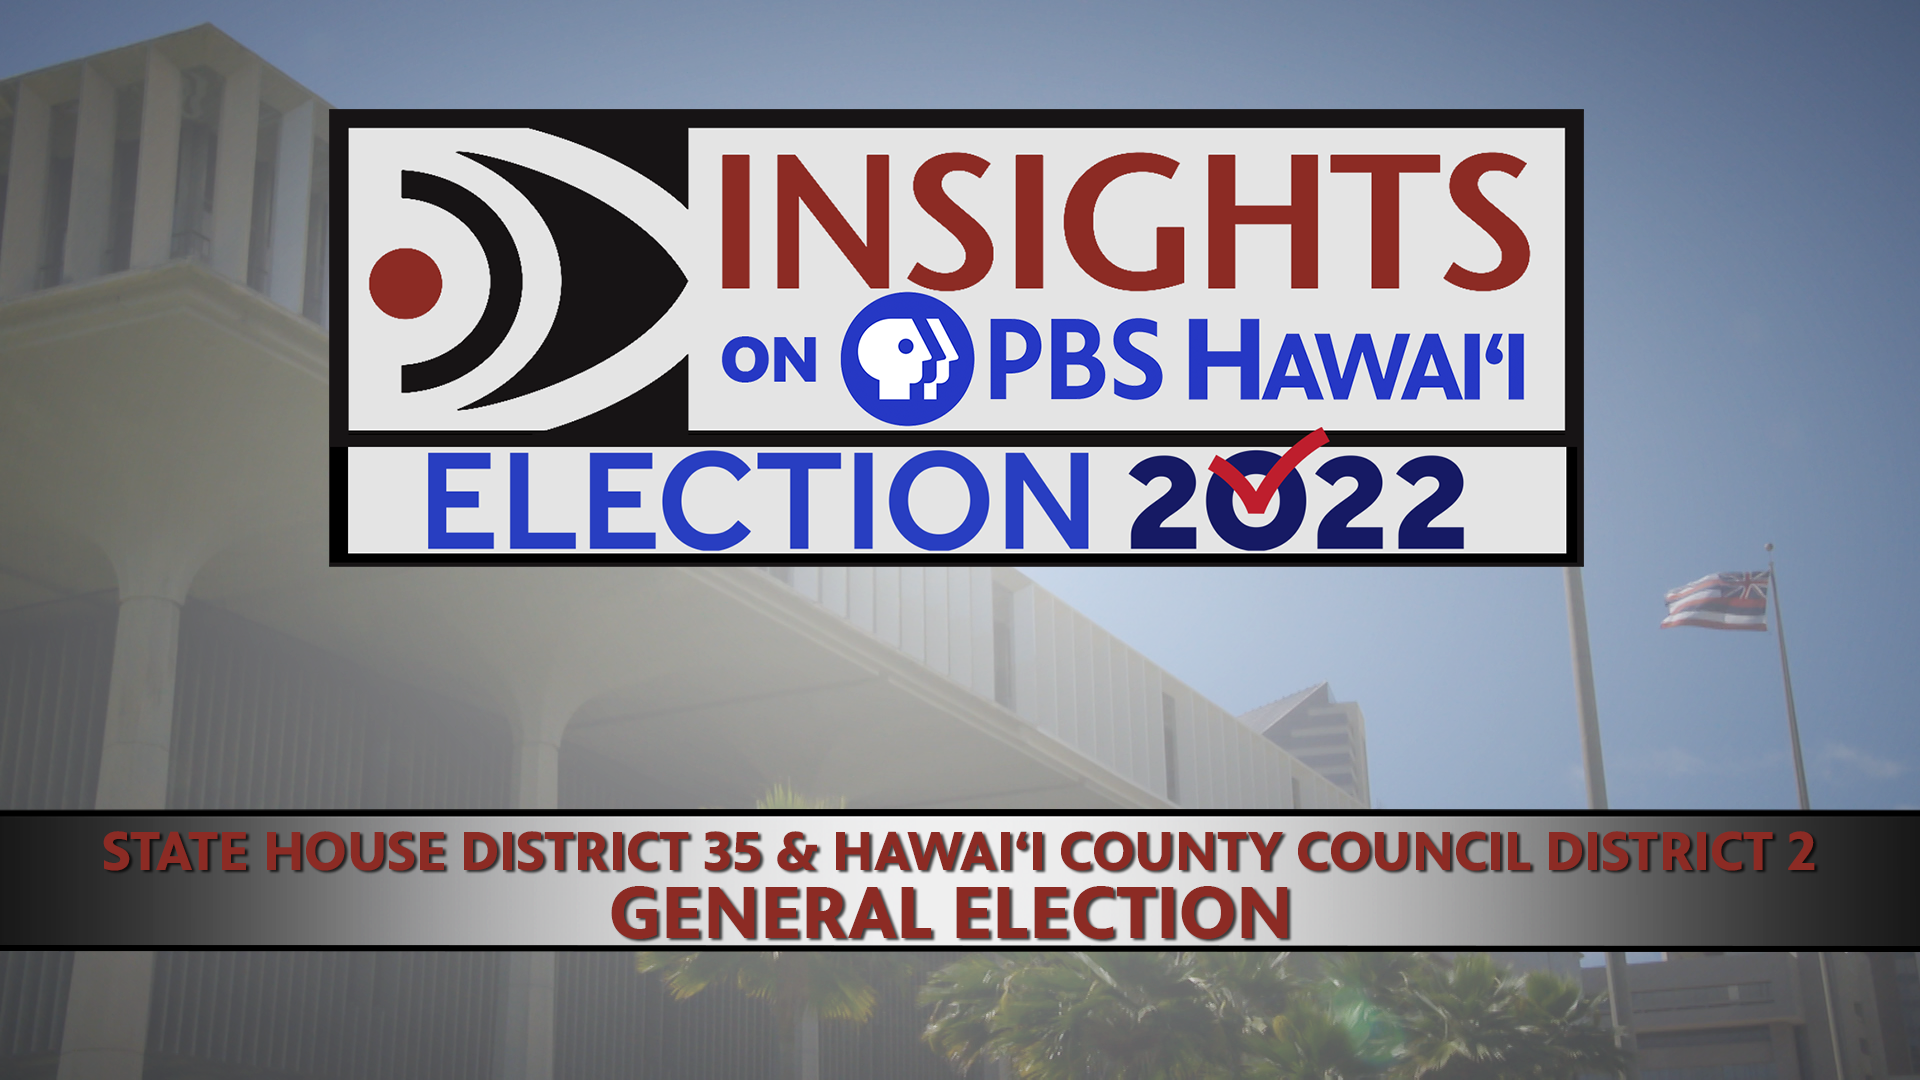 STATE HOUSE DISTRICT 35 AND HAWAIʻI COUNTY COUNCIL DISTRICT 2